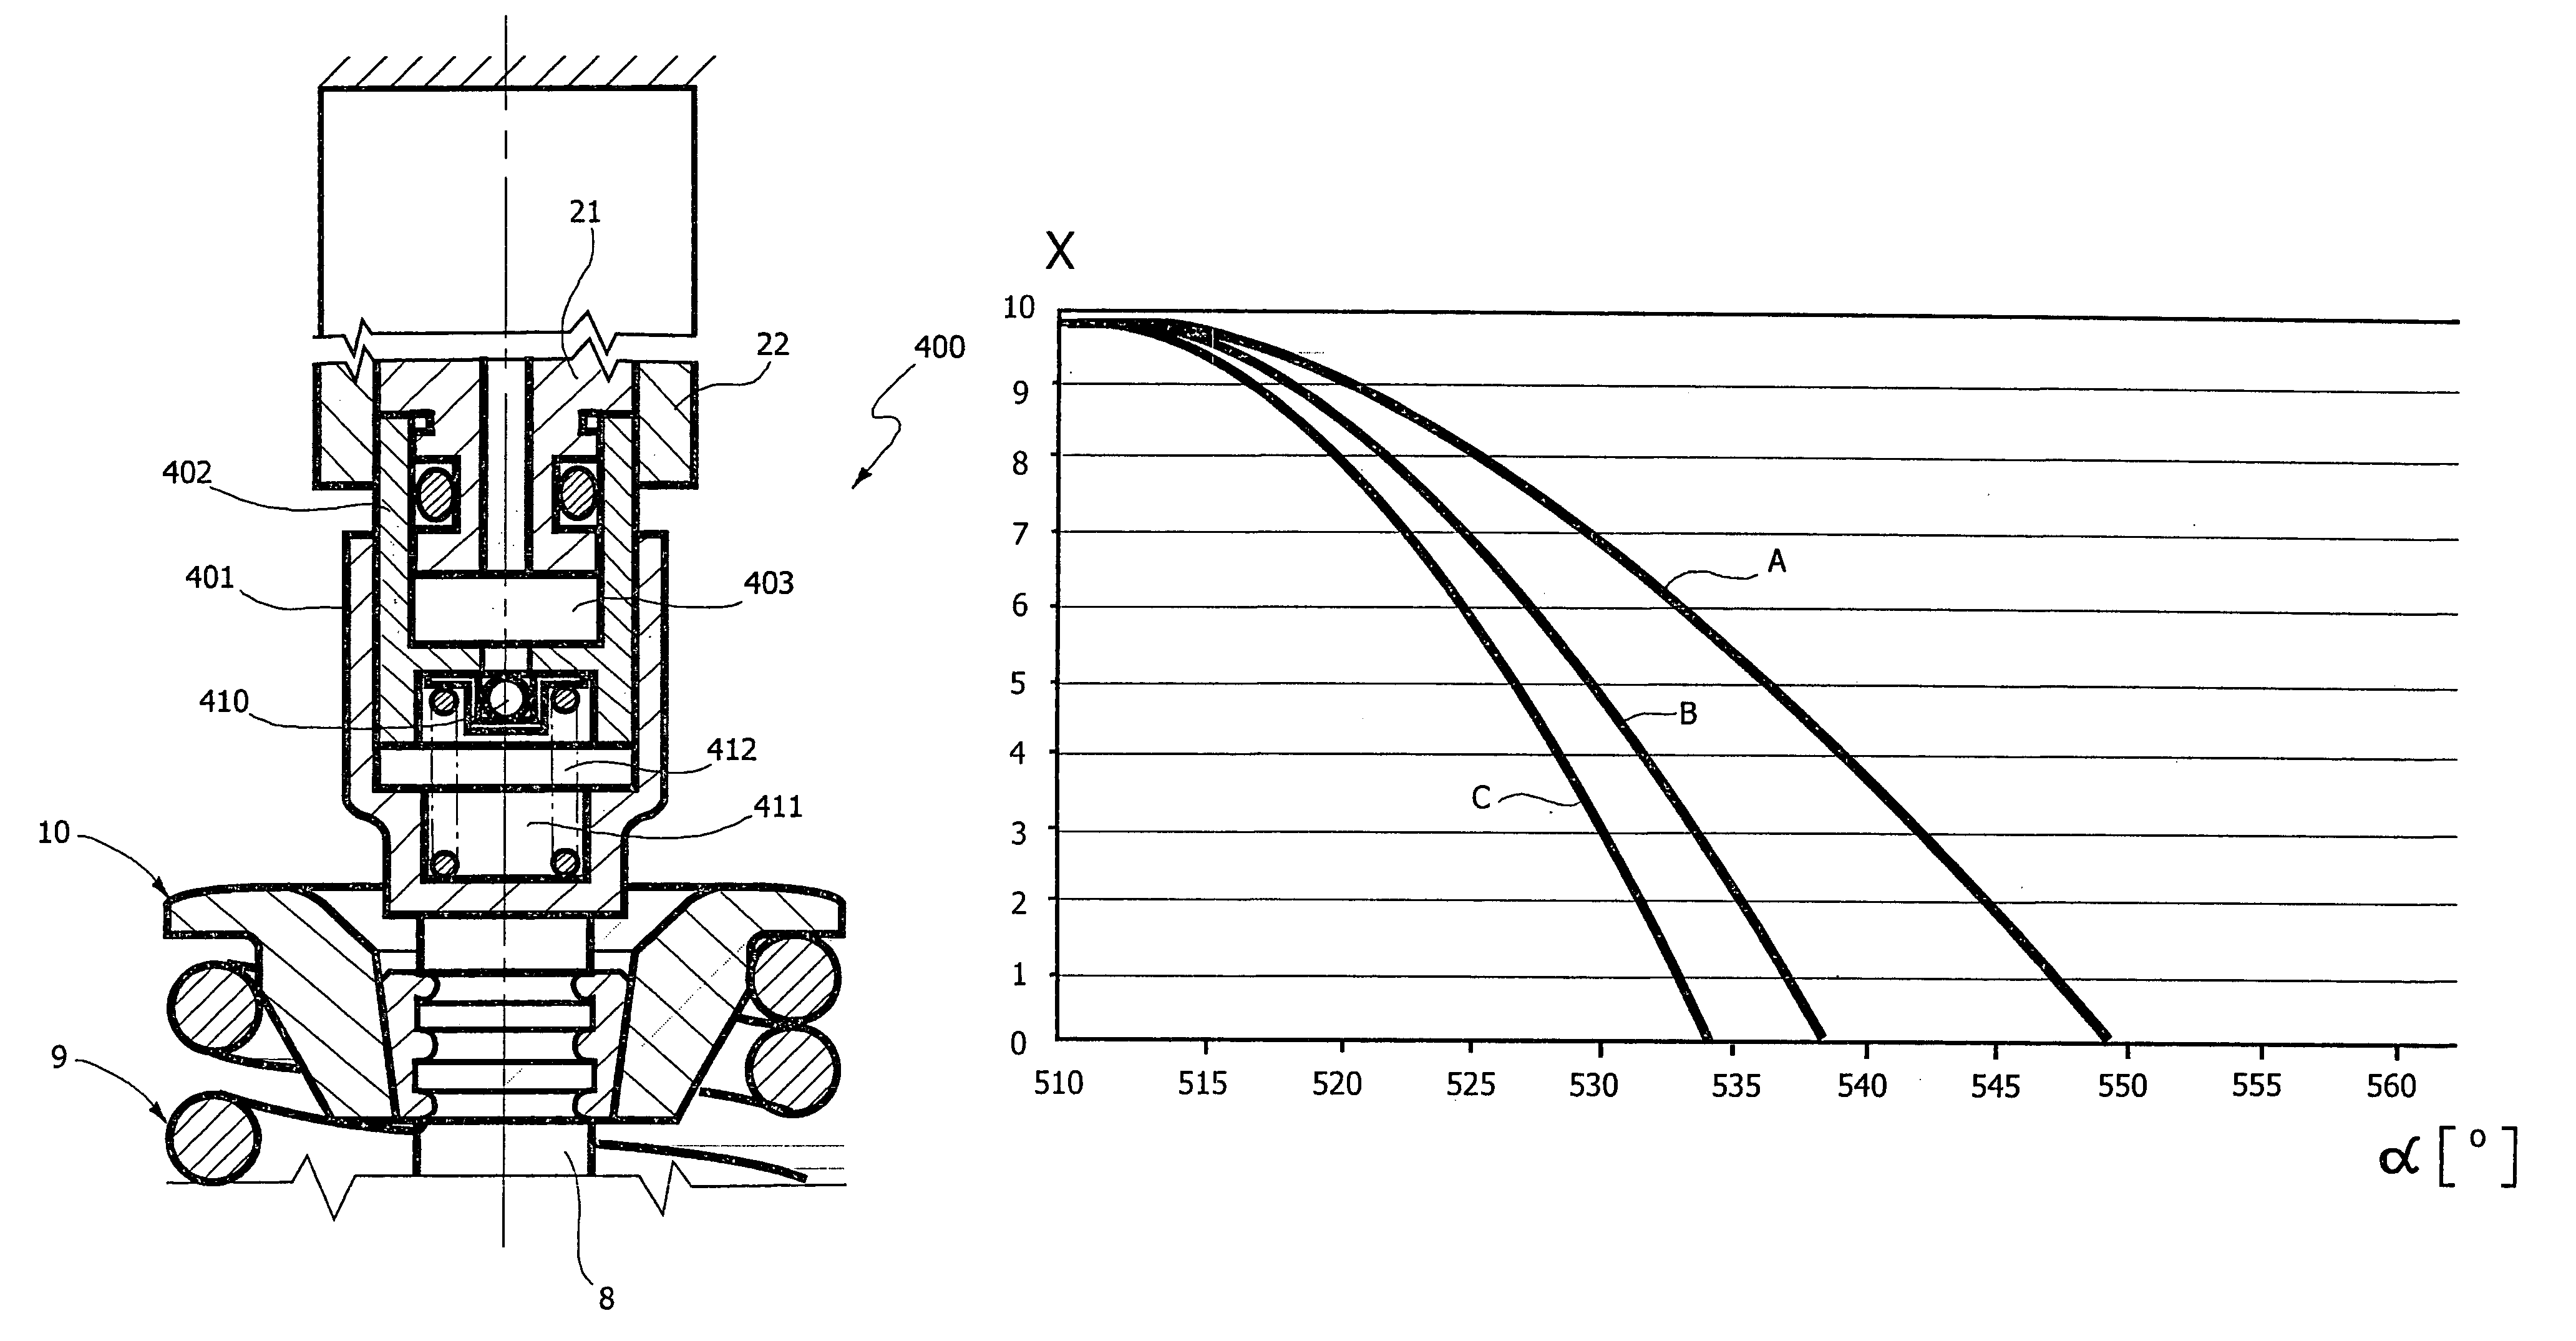 Internal combustion engine having valves with variable actuation each provided with a hydraulic tappet at the outside of the associated actuating unit